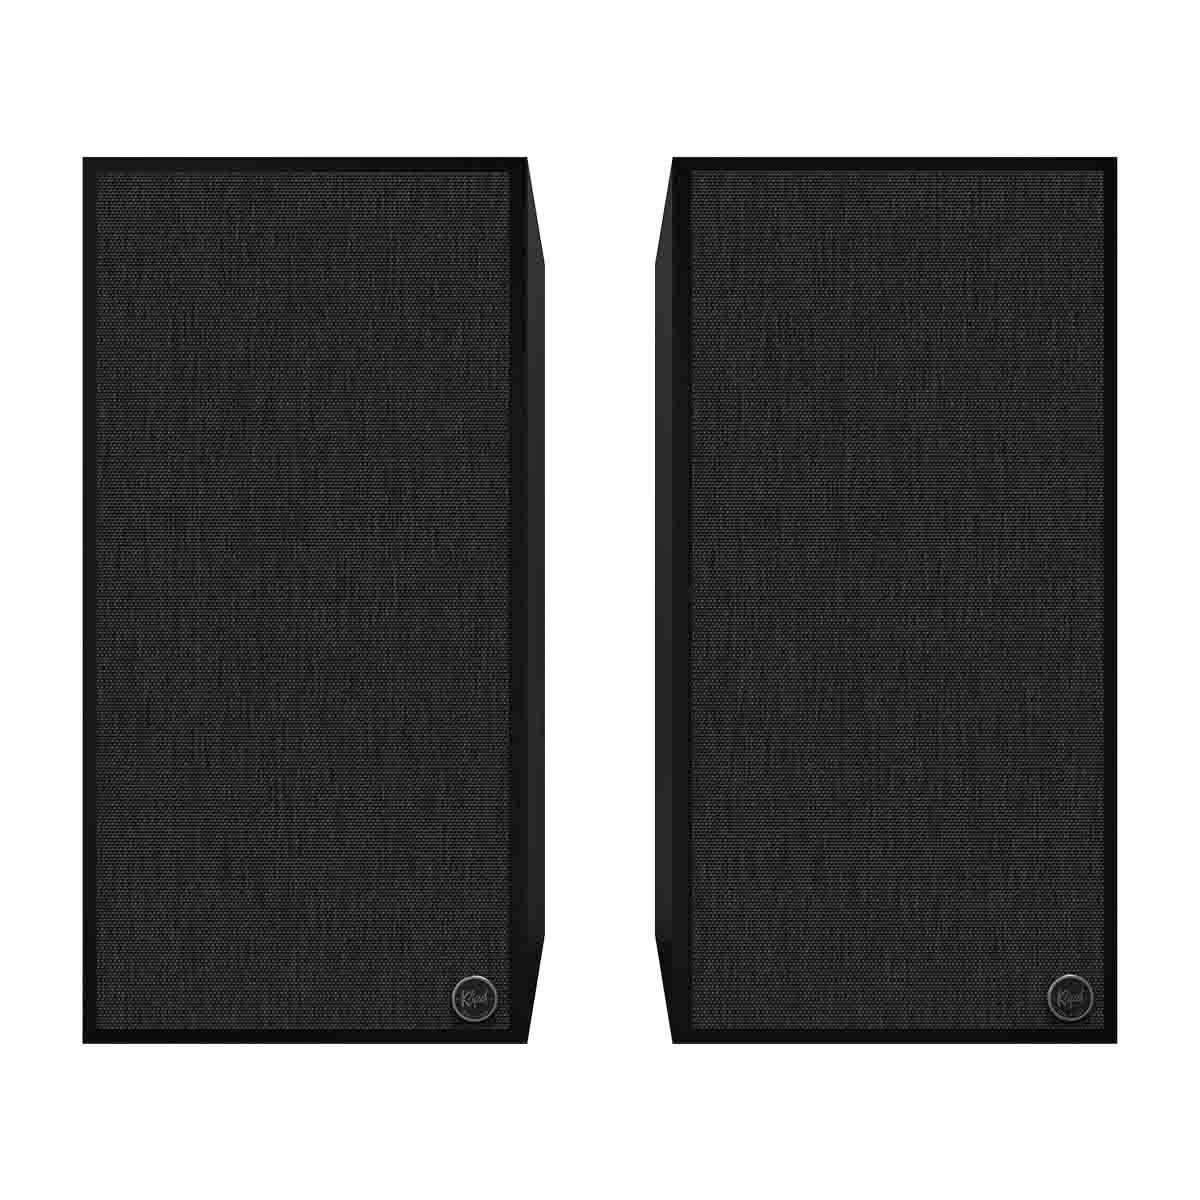 Klipsch The Nines Powered Speakers - Pair - black front view with grille